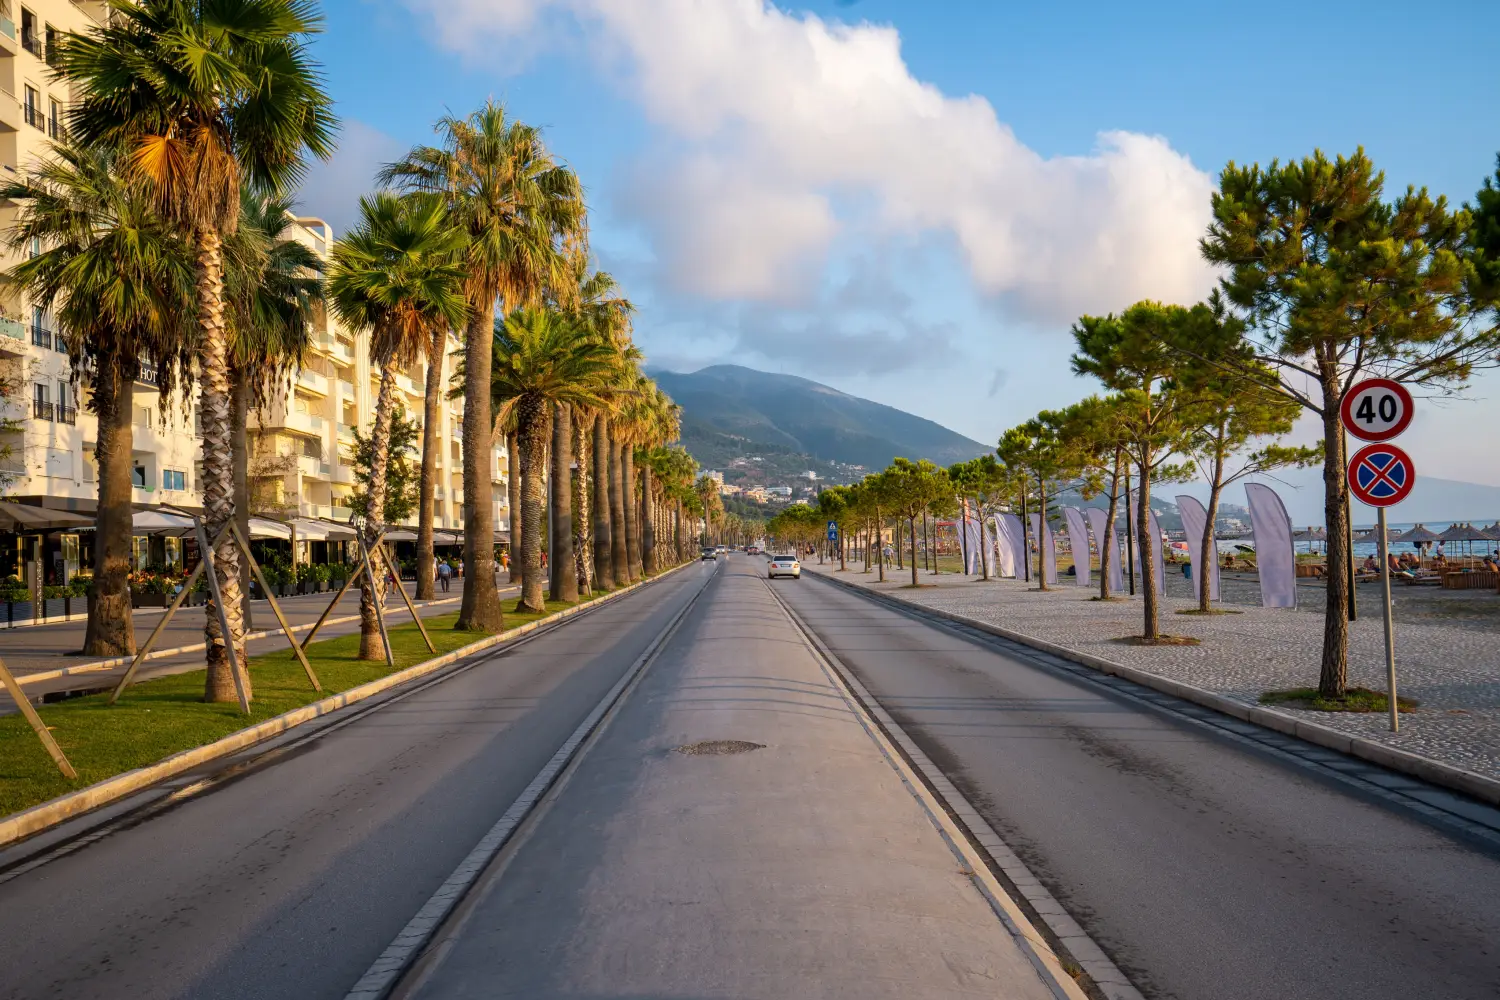 Road View surrounded by pine trees in Vlora